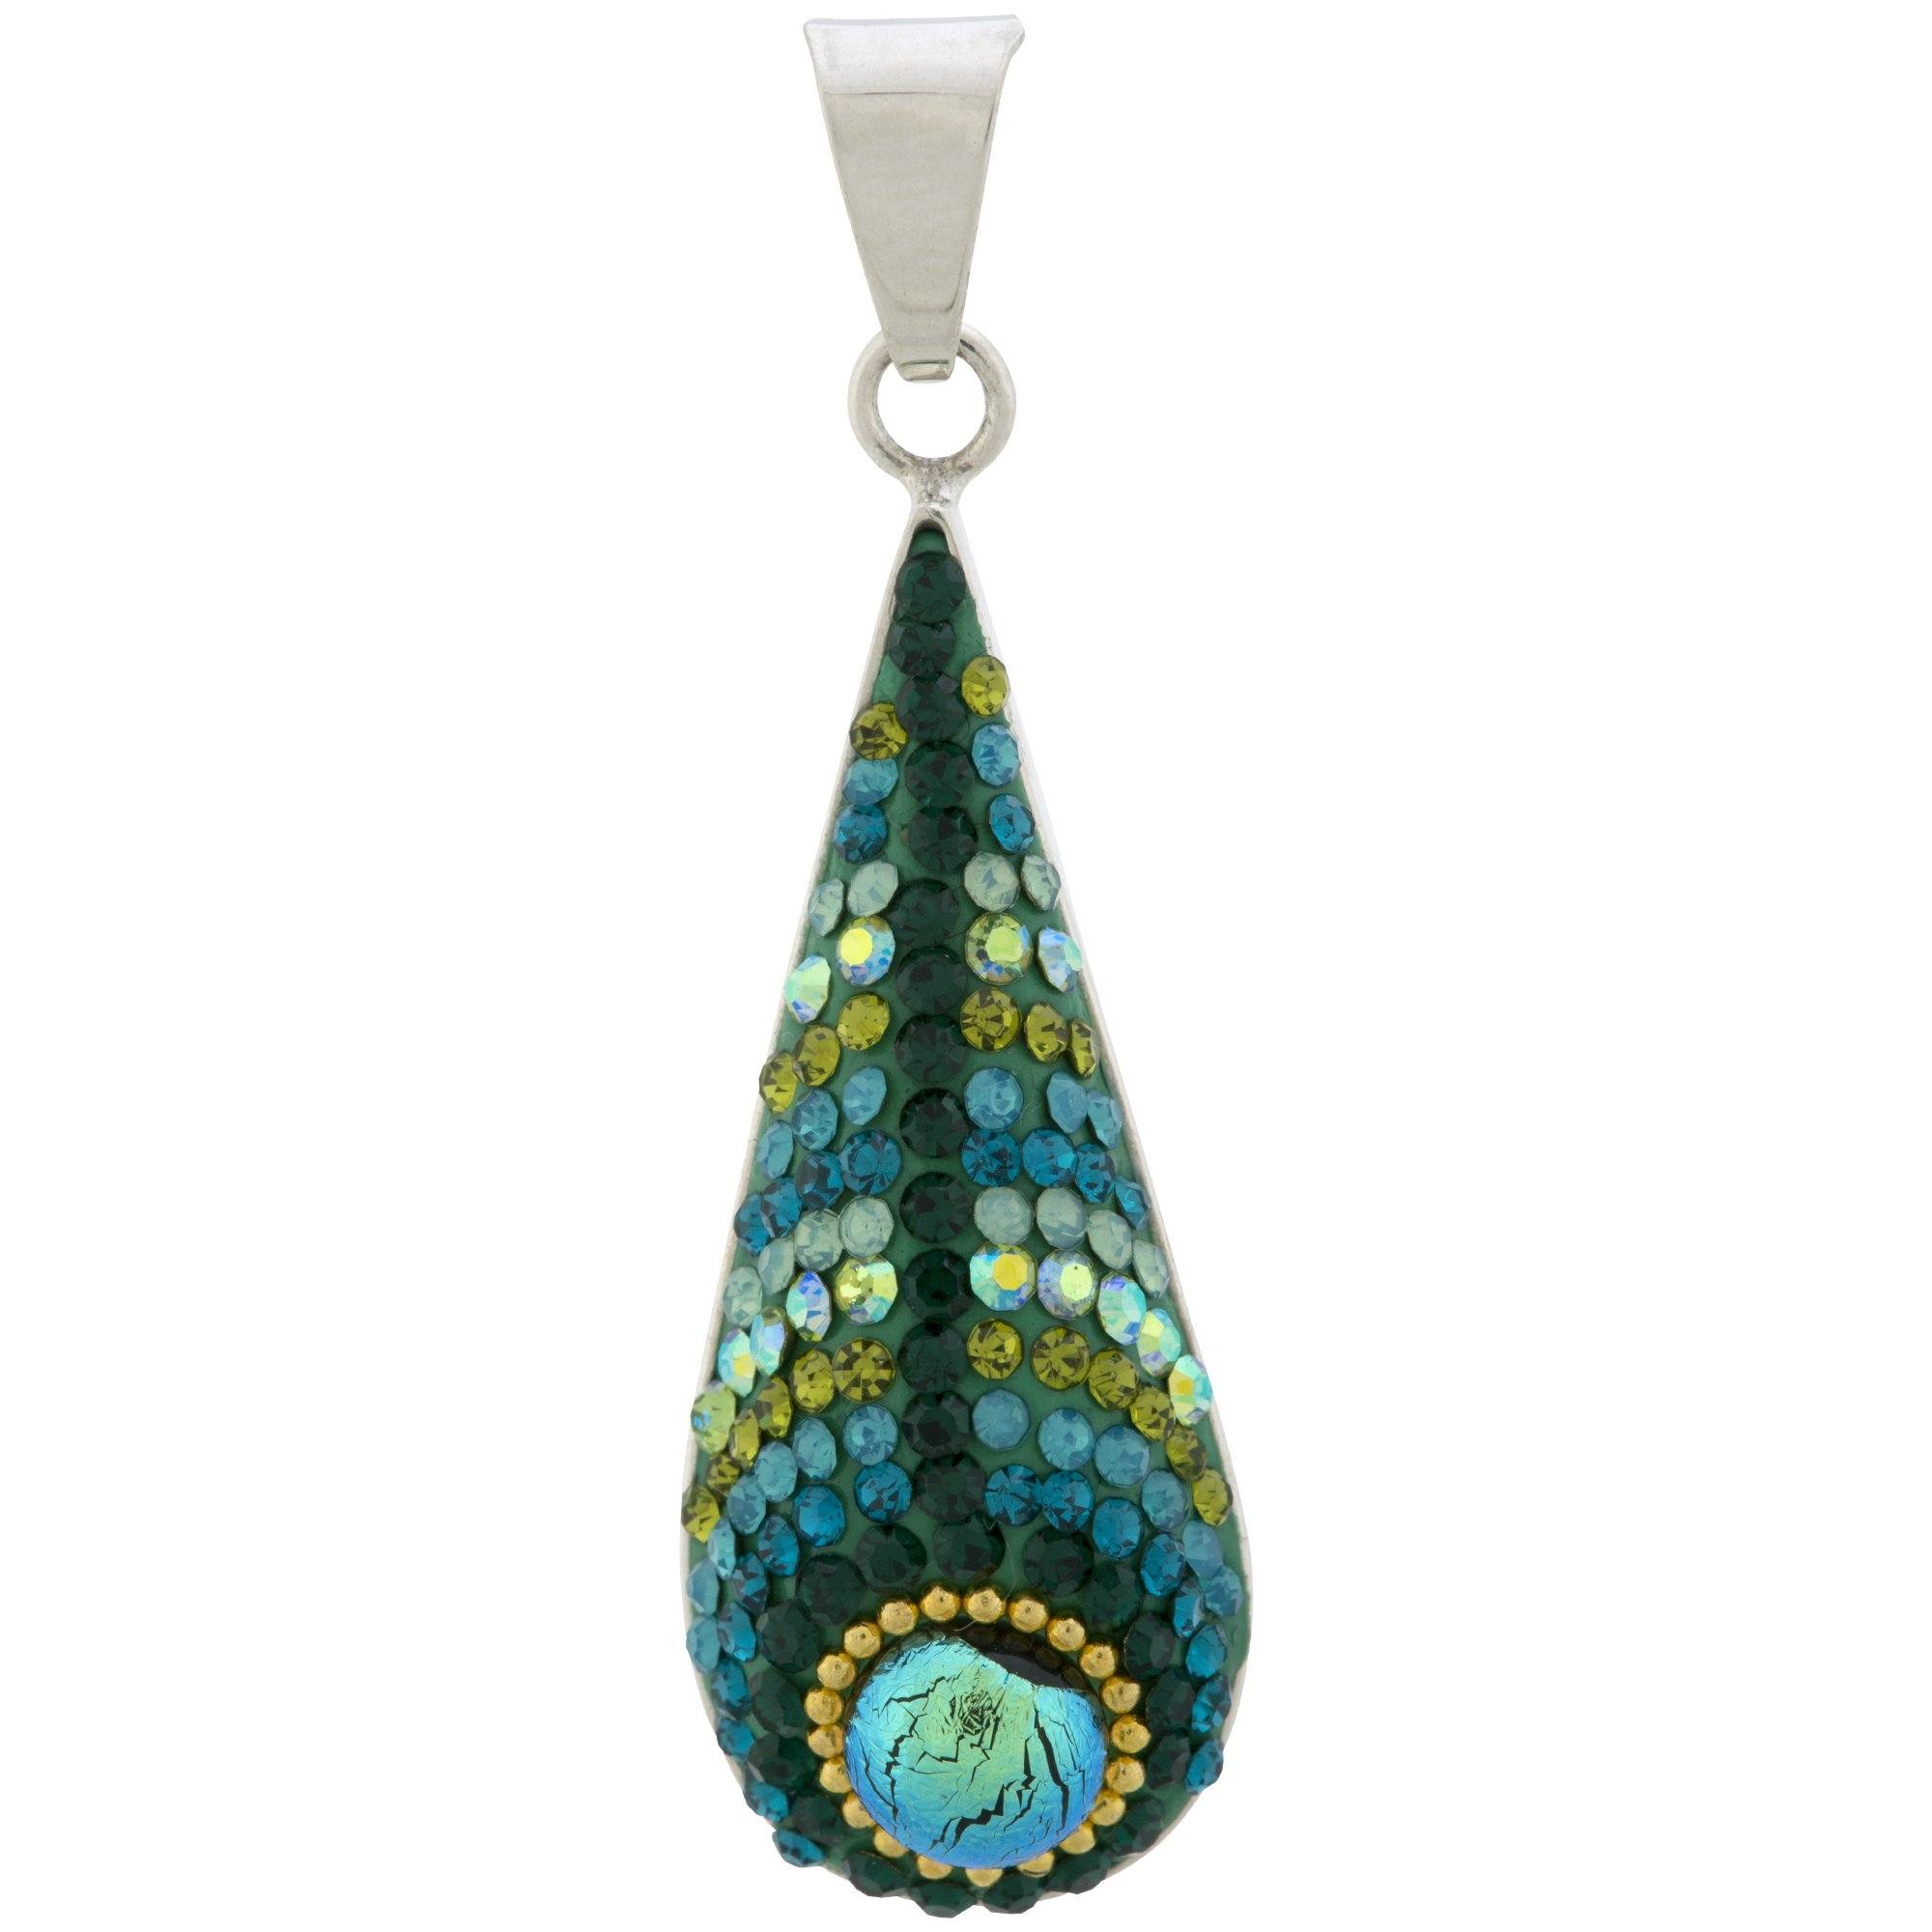 Peacock Mosaic & Sterling Necklace - With Sterling Cable Chain